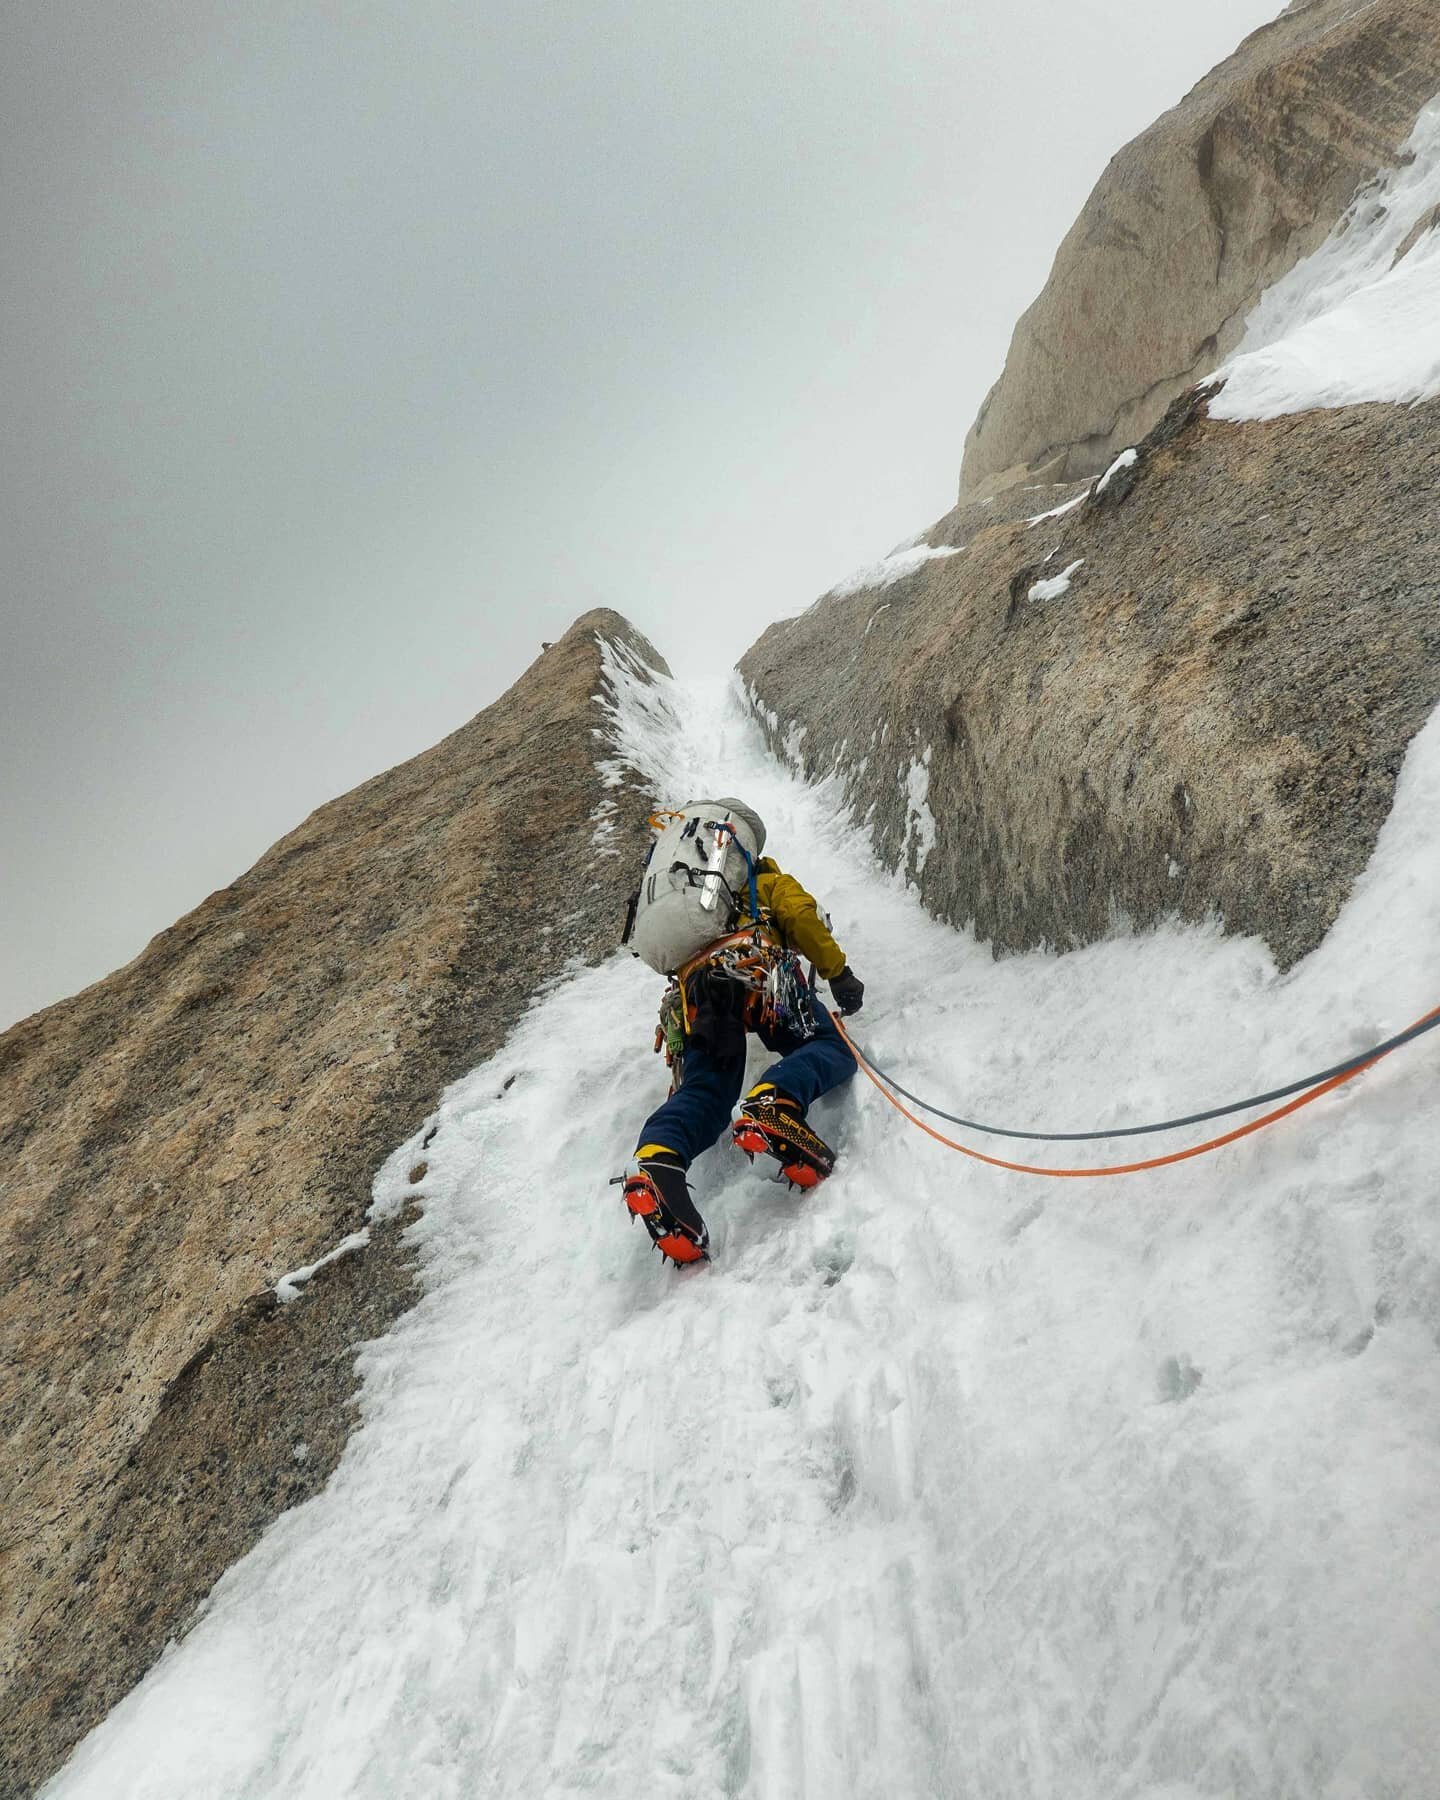 The moments on the summit from &quot;Labyrinths of Rock and Ice&quot; in @alpinistmag:

&quot;I arrived last, to a deep embrace from Chris. I don't remember sharing much in the way of spoken sentiments or congratulations. We simply screamed to the mo